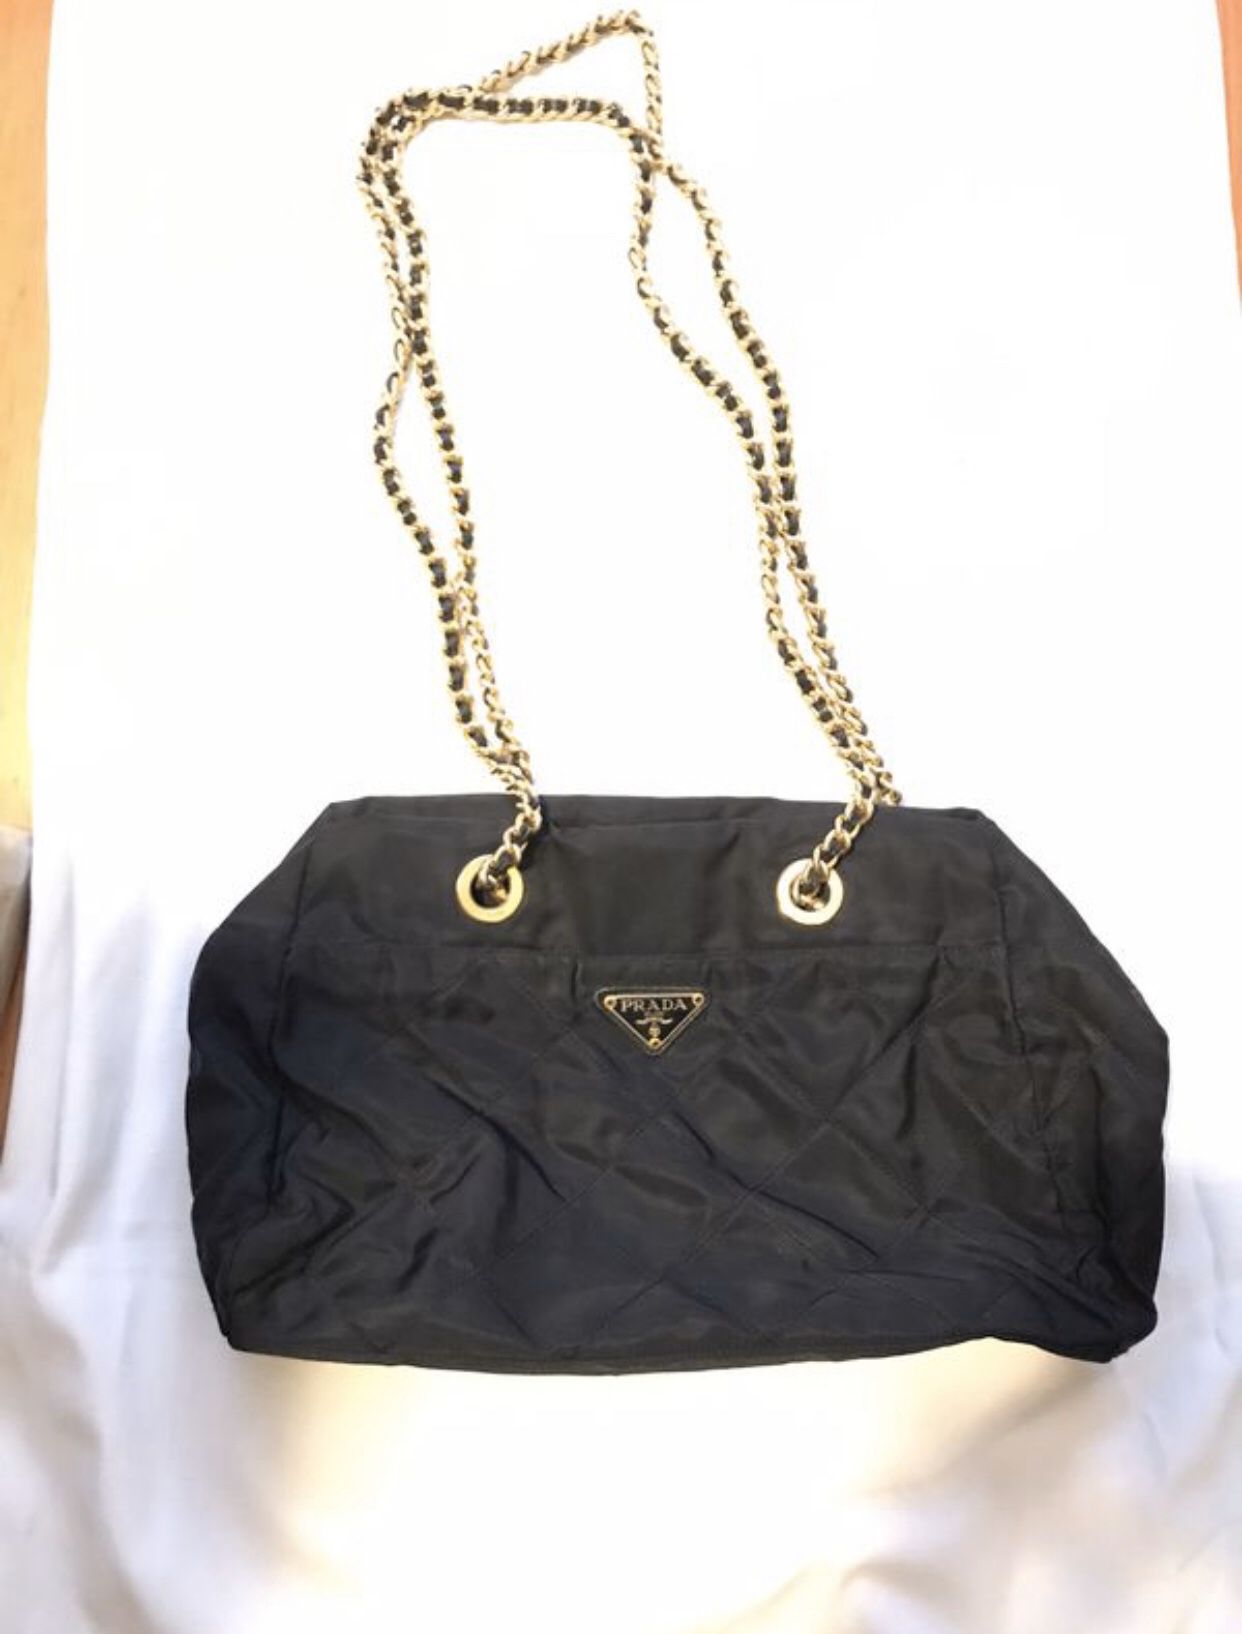 Prada bag with Gold/leather chains